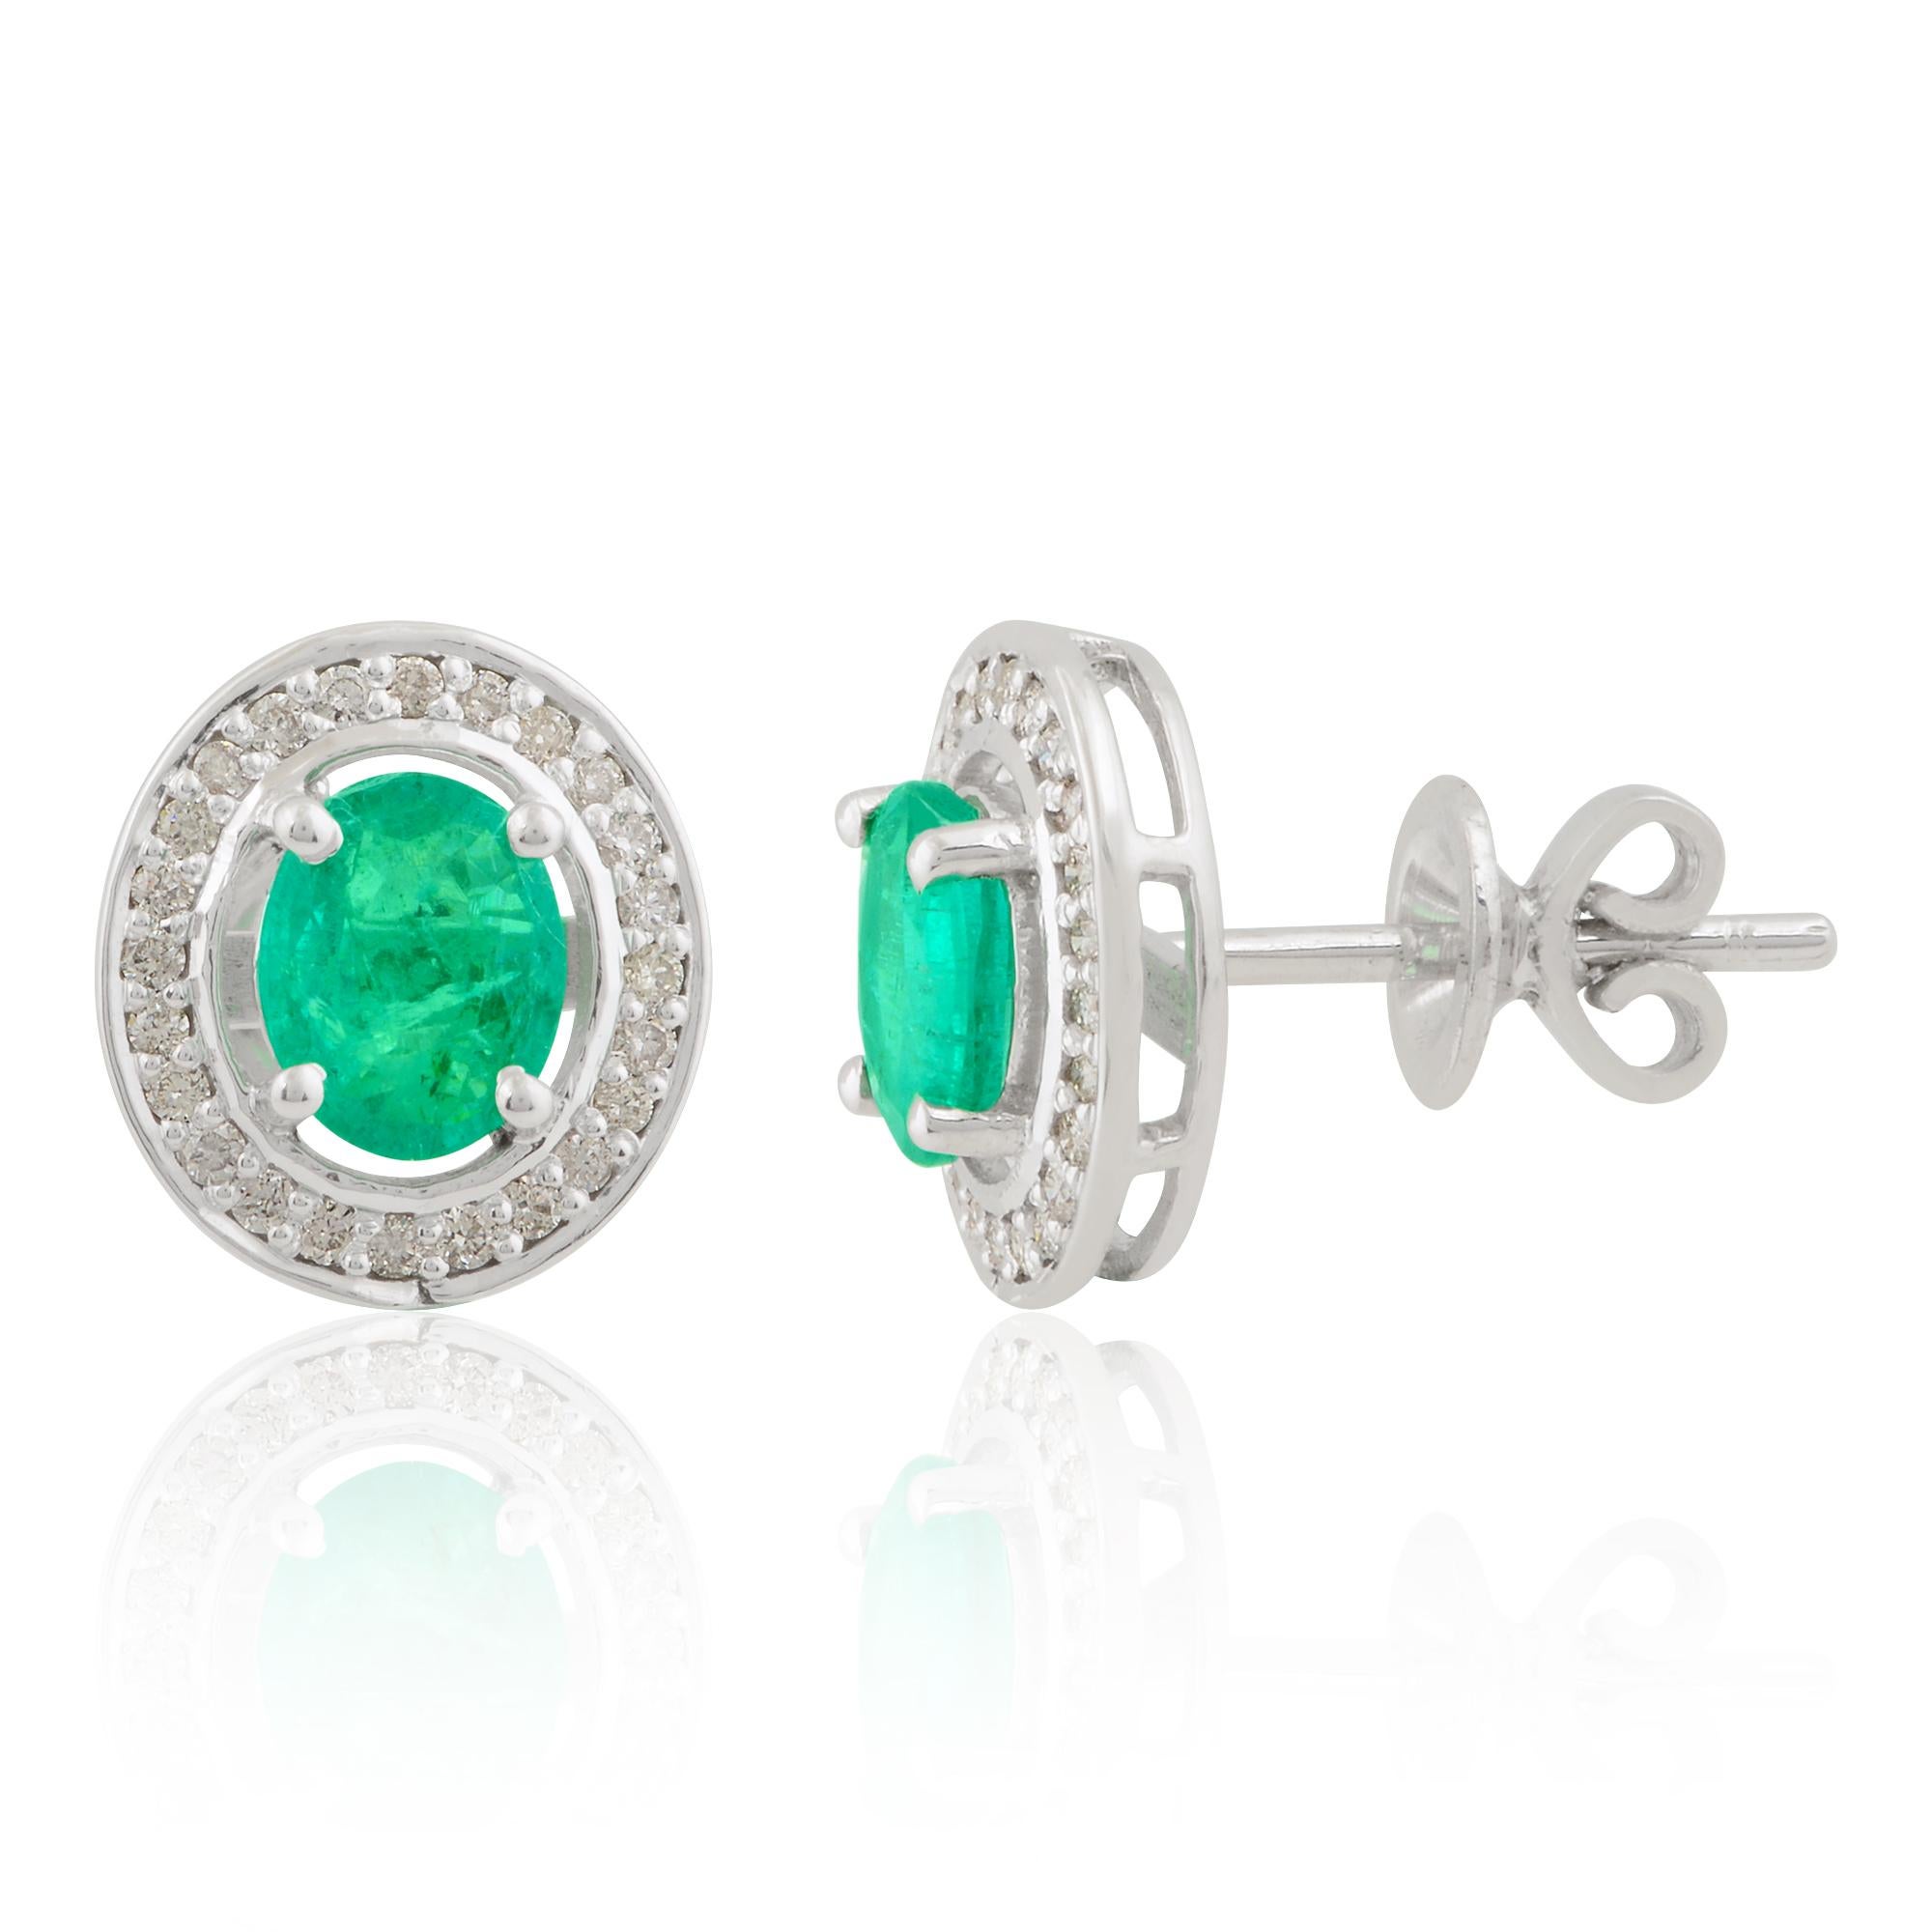 Item Code :- STE-1084A
Gross Wt :- 2.80 gm
10k White Gold Wt :- 2.43 gm
Natural Diamond Wt :- 0.70 carat ( SI Clarity & HI Color )
Emerald Wt :- 1.14 carat
Earrings Size :- 11x10 mm approx.
✦ Sizing
.....................
We can adjust most items to